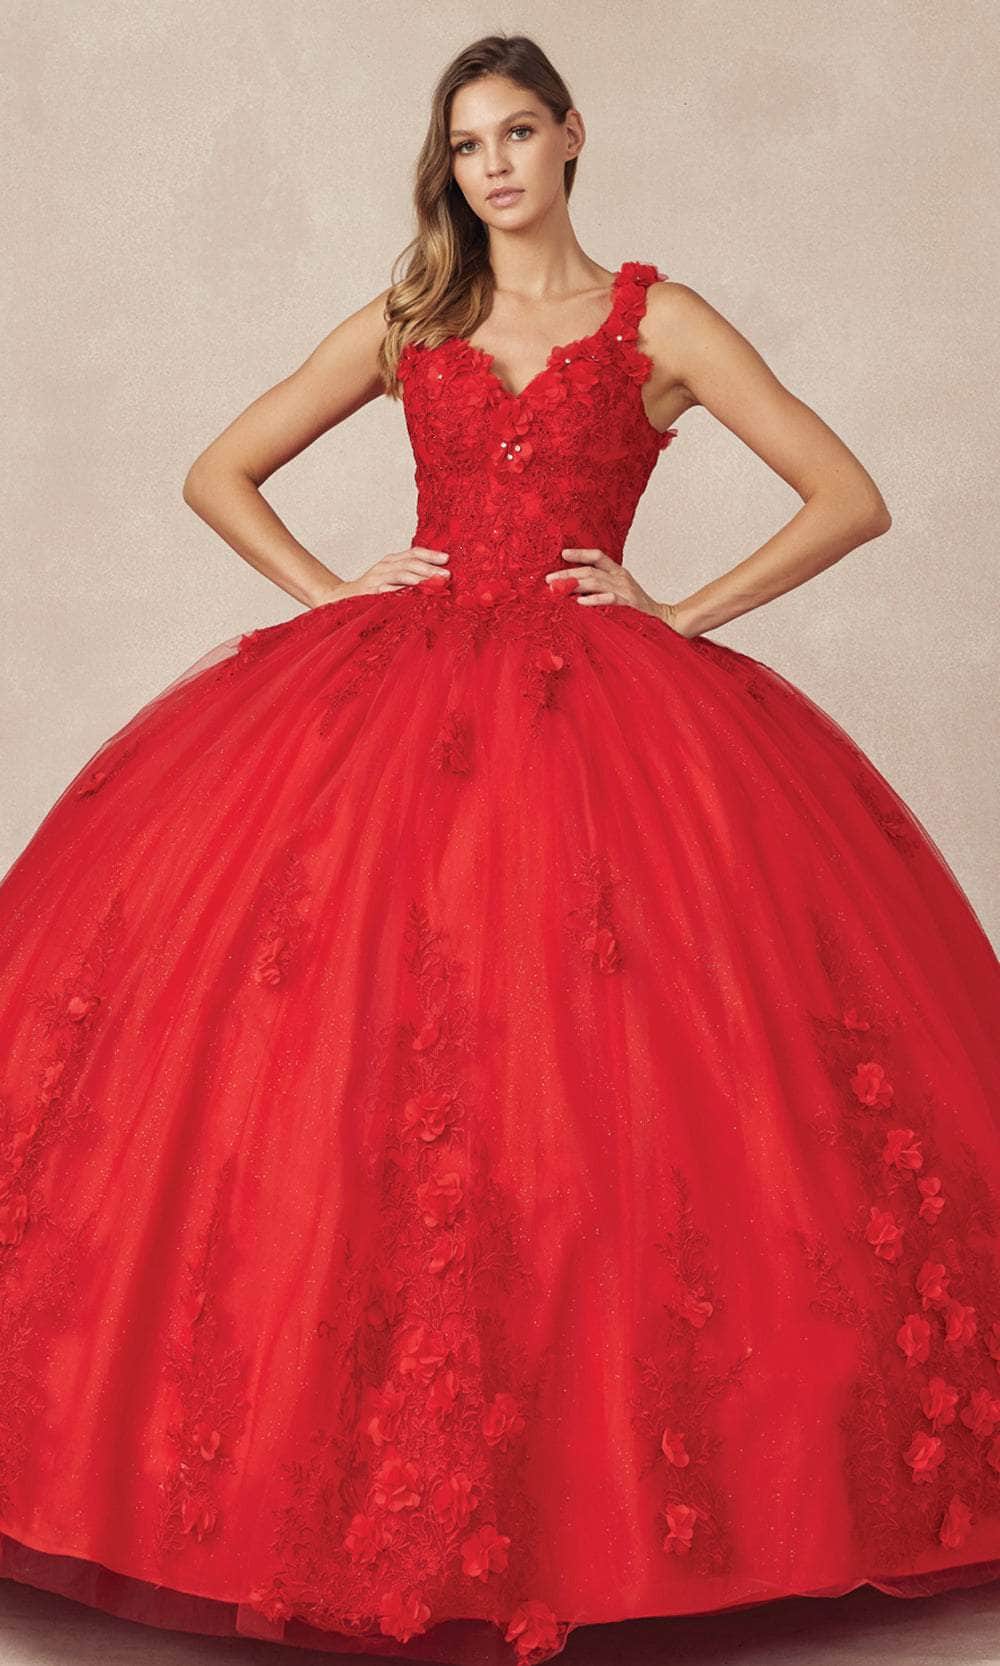 Juliet Dresses 1437 - Floral Applique Ball Gown Special Occasion Dress XS / Red